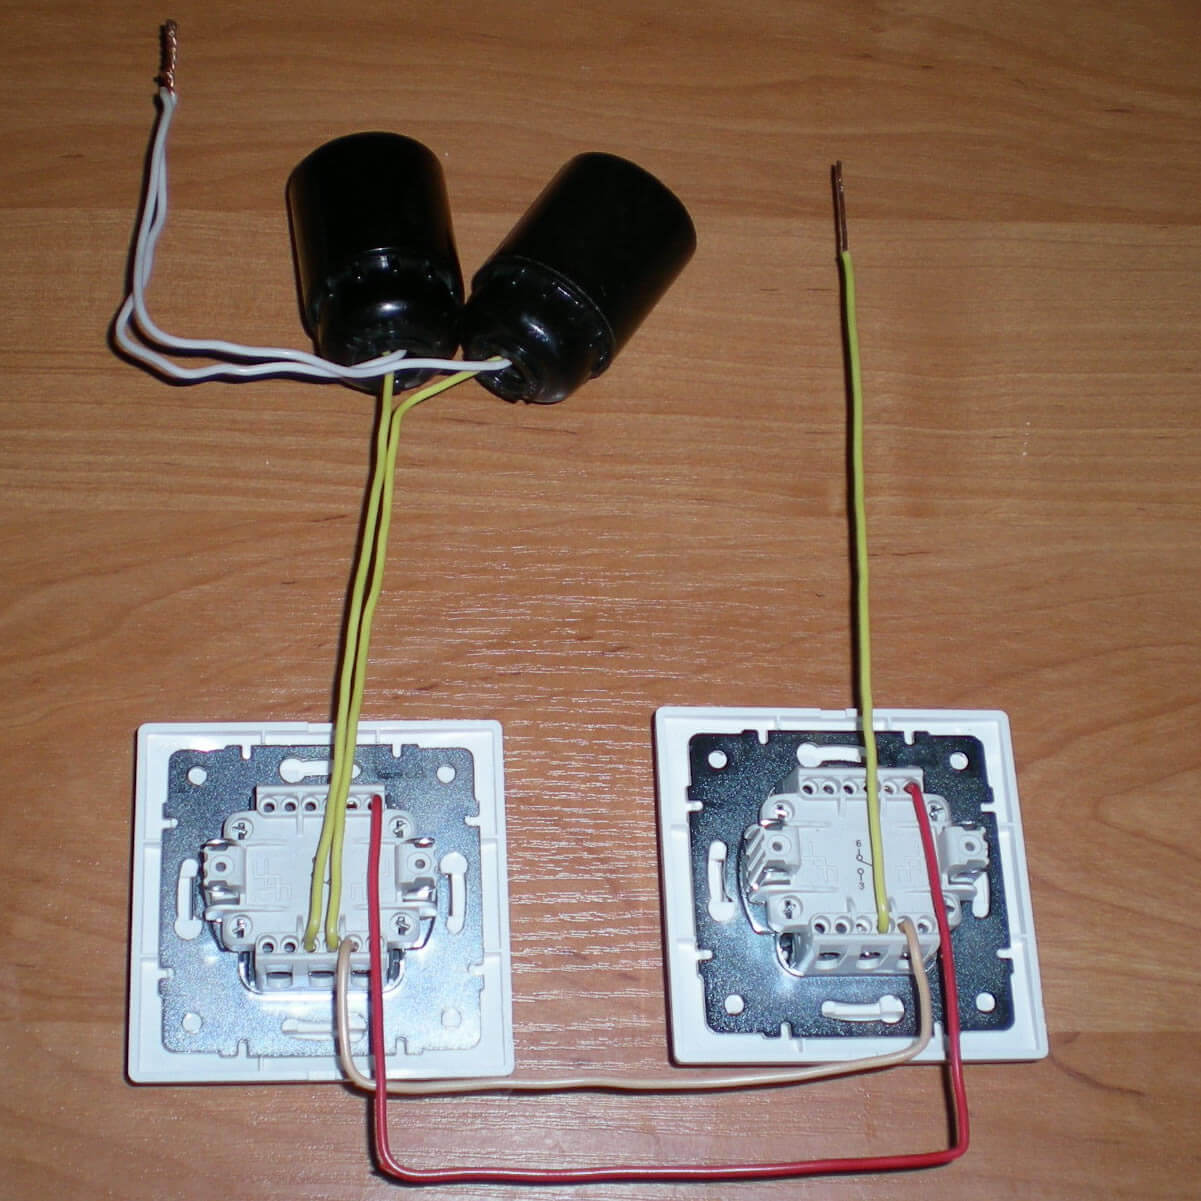 Control of two bulbs from two places